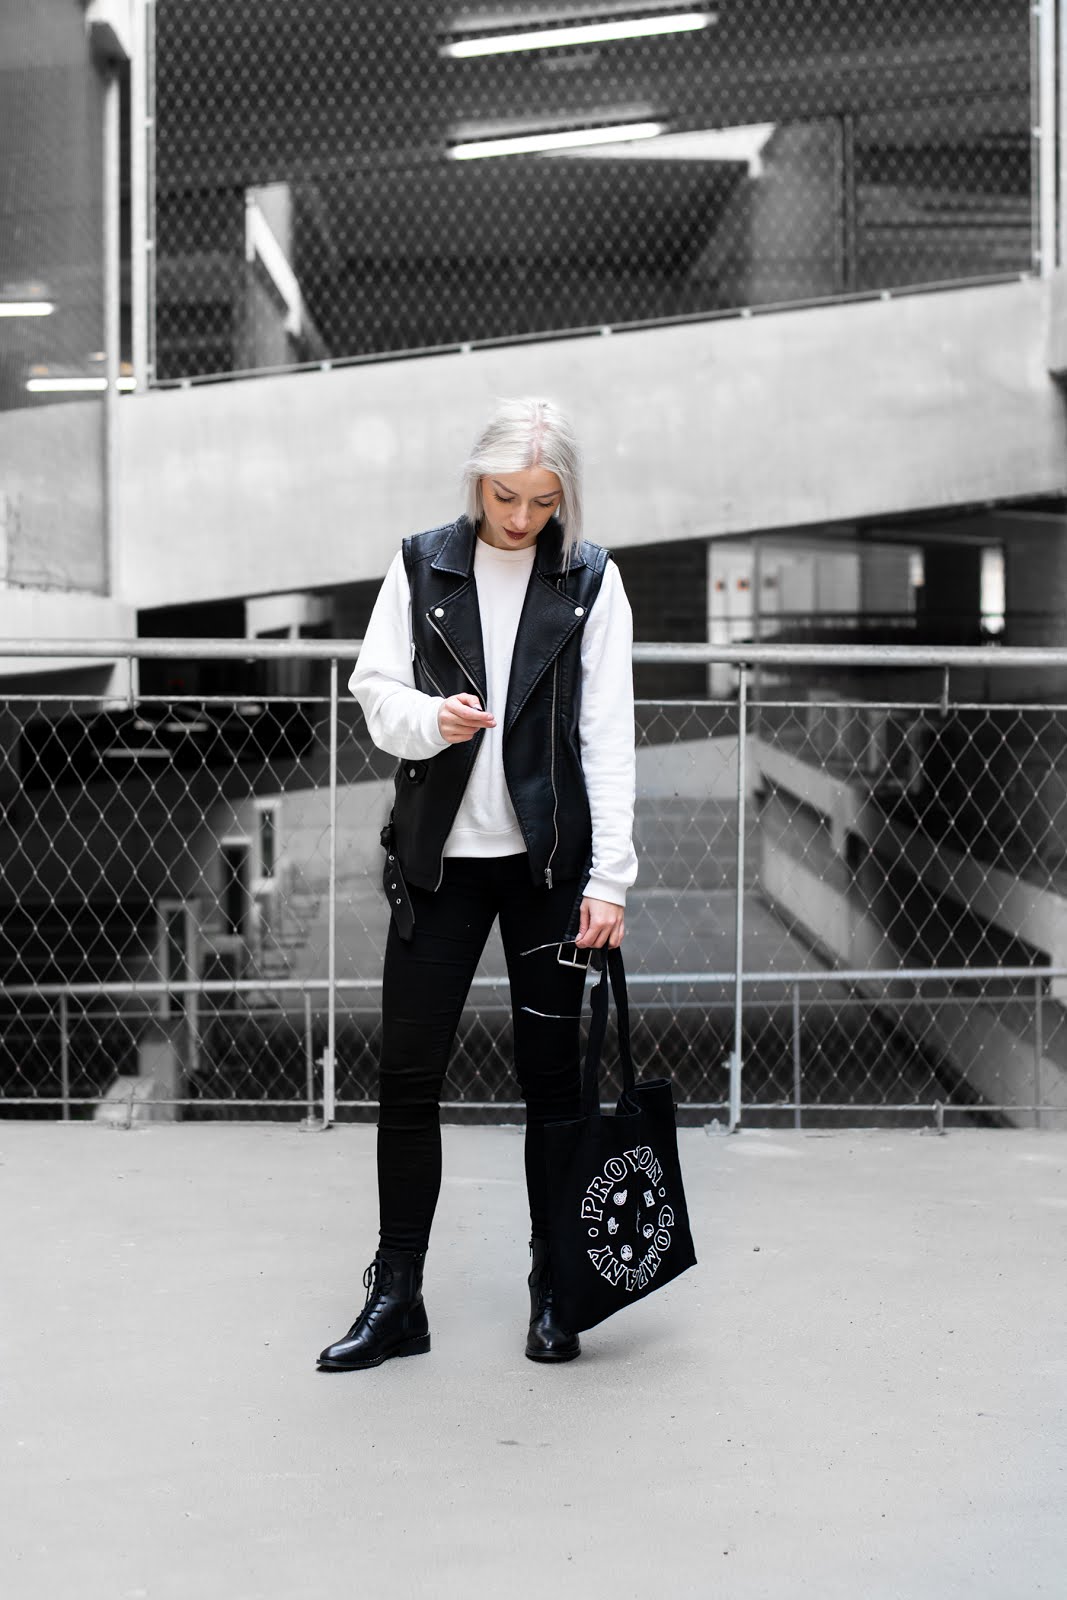 black and white outfit, minimal, street style, pandco, provision & co, sacha shoes, lace up boots, veter laarzen, biker vest